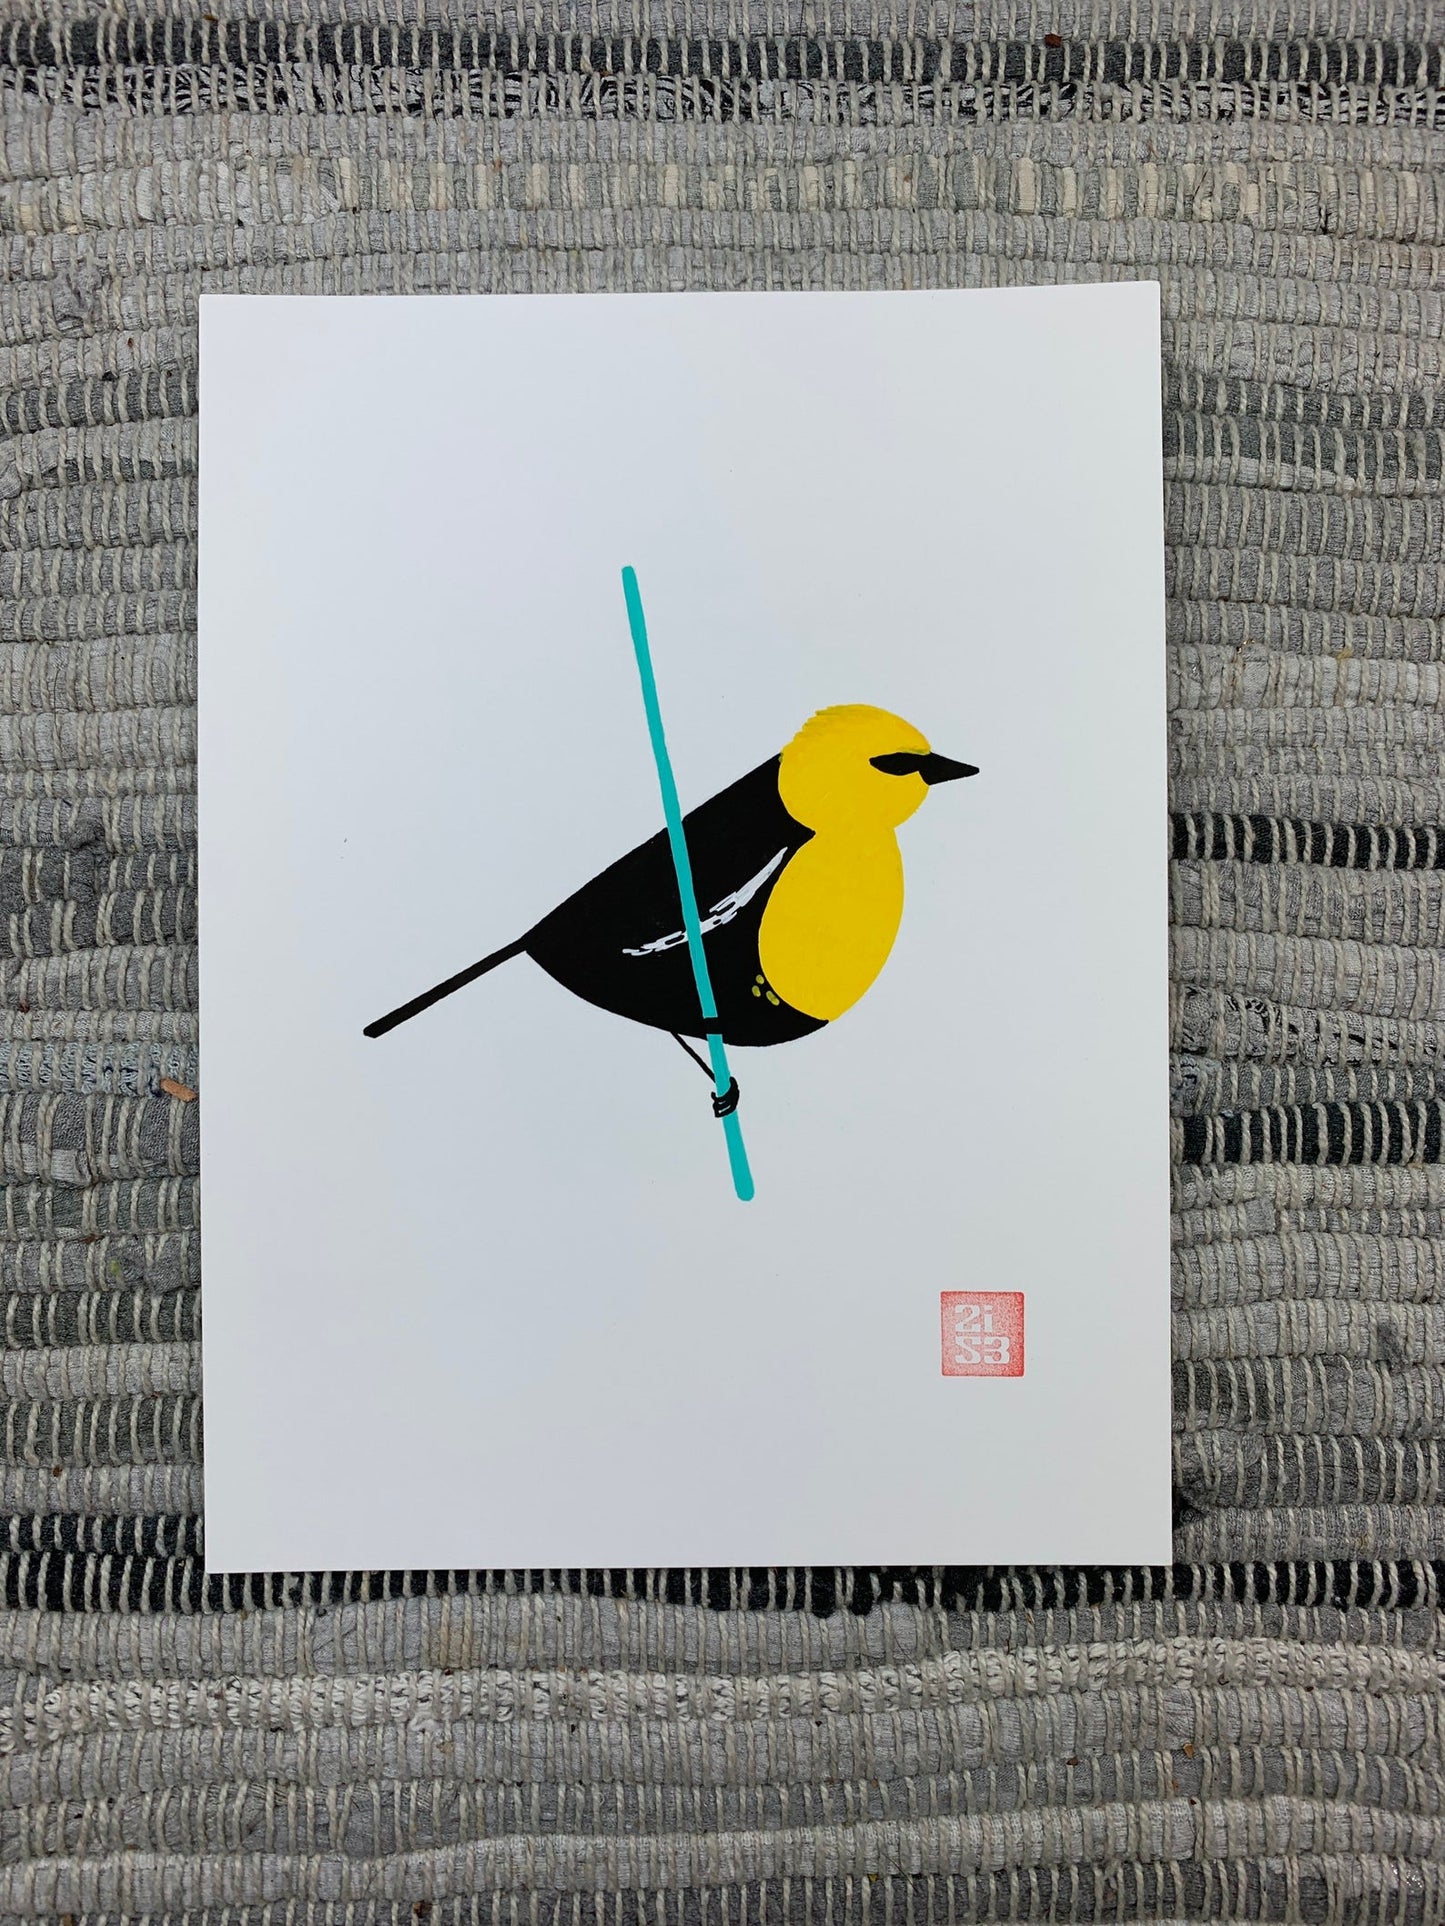 Original artwork of black bird with a bright yellow head standing on a thin wire.